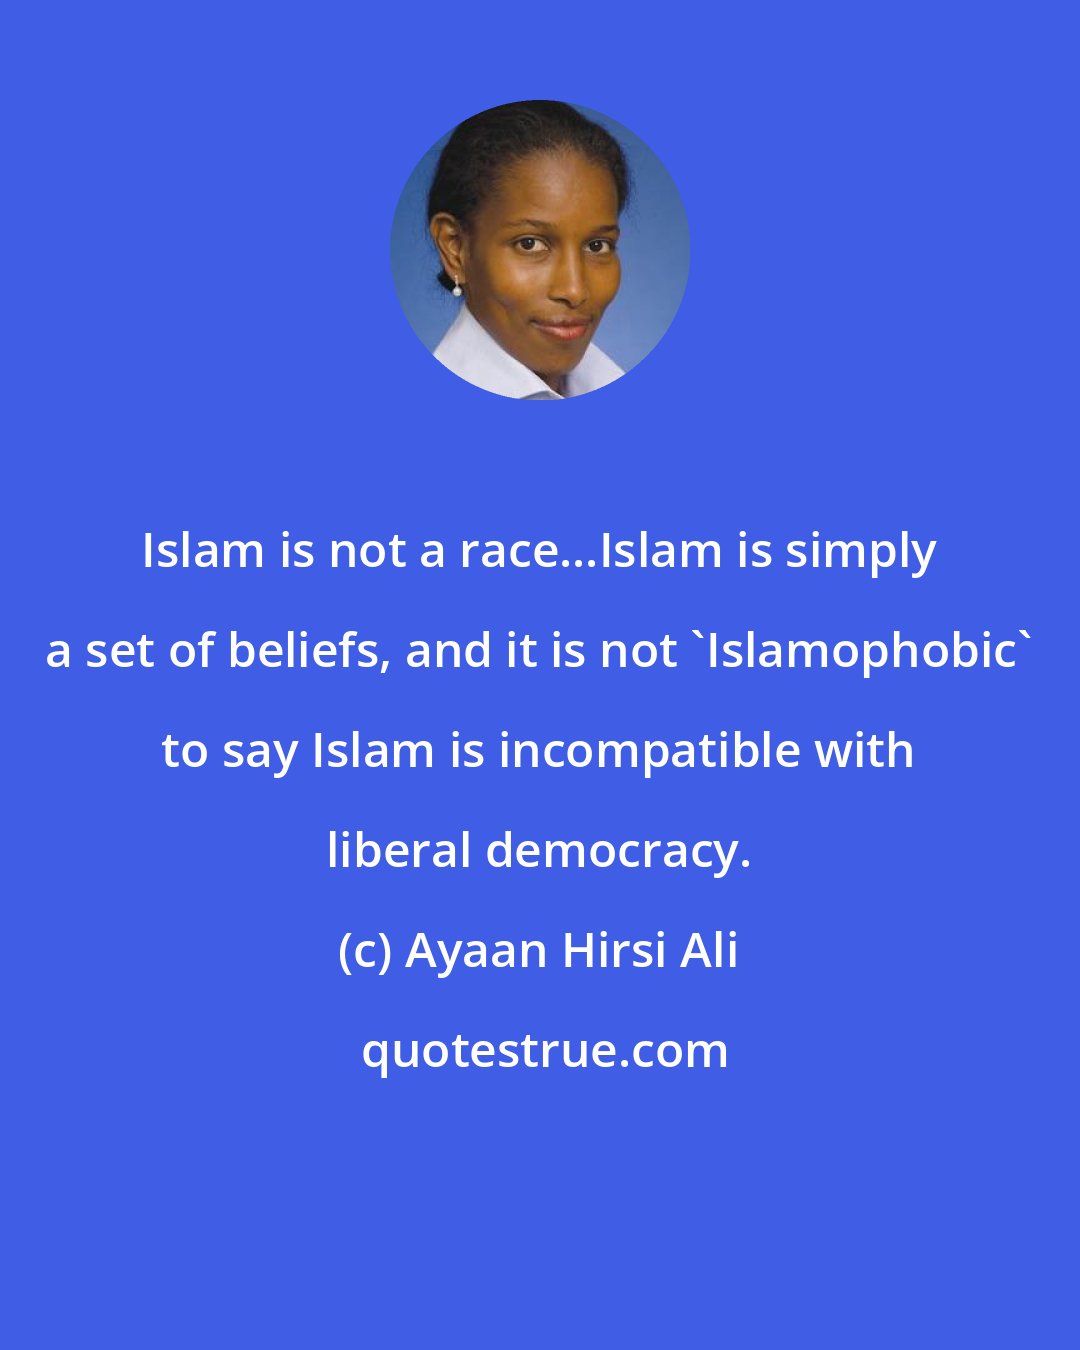 Ayaan Hirsi Ali: Islam is not a race...Islam is simply a set of beliefs, and it is not 'Islamophobic' to say Islam is incompatible with liberal democracy.